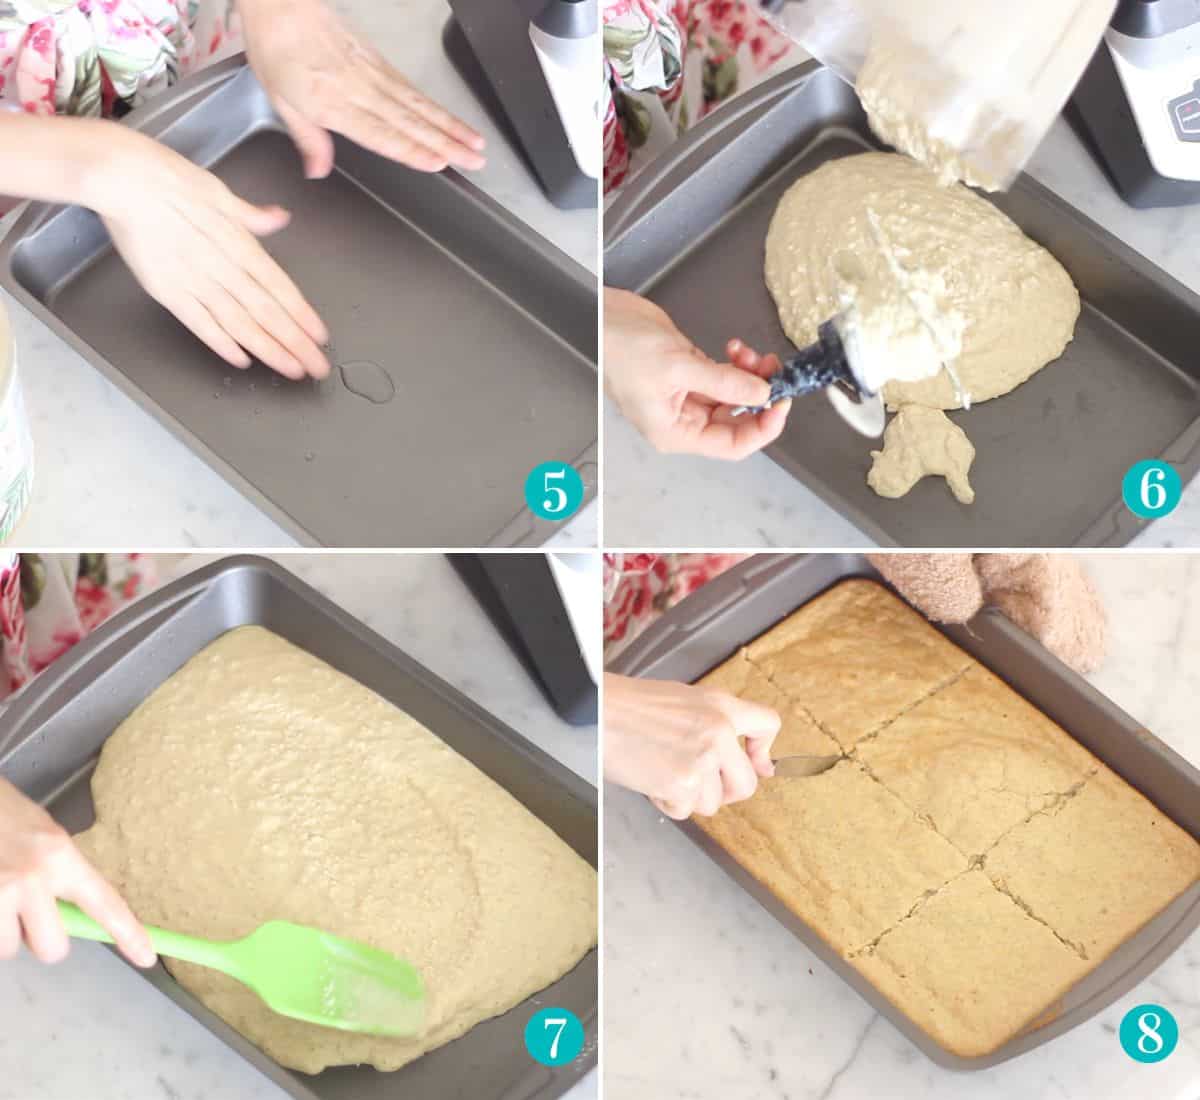 four photo collage with hands rubbing oil onto a sheet pan, pancake batter being poured onto baking sheet, green spatula pushing batter to edges, and a hand slicing sheet pan protein pancakes into pieces after being baked.